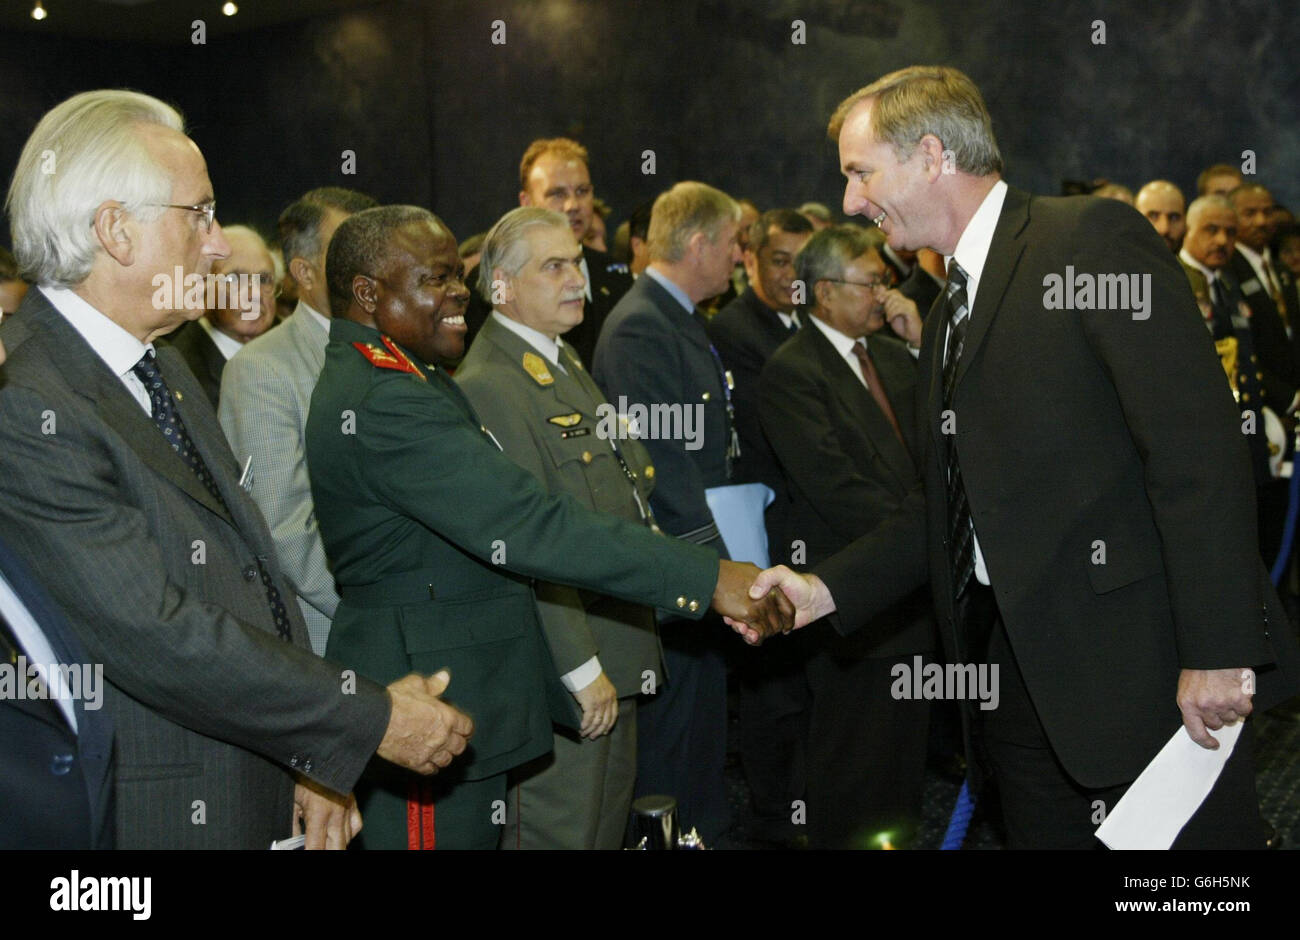 British Defence Secretary Geoff Hoon greets delegates attending Defence Systems & and Equipment International Conference 2003, a weapons trade show being held in London's Docklands. The Conference, the largest weapons trade show in Europe. Stock Photo